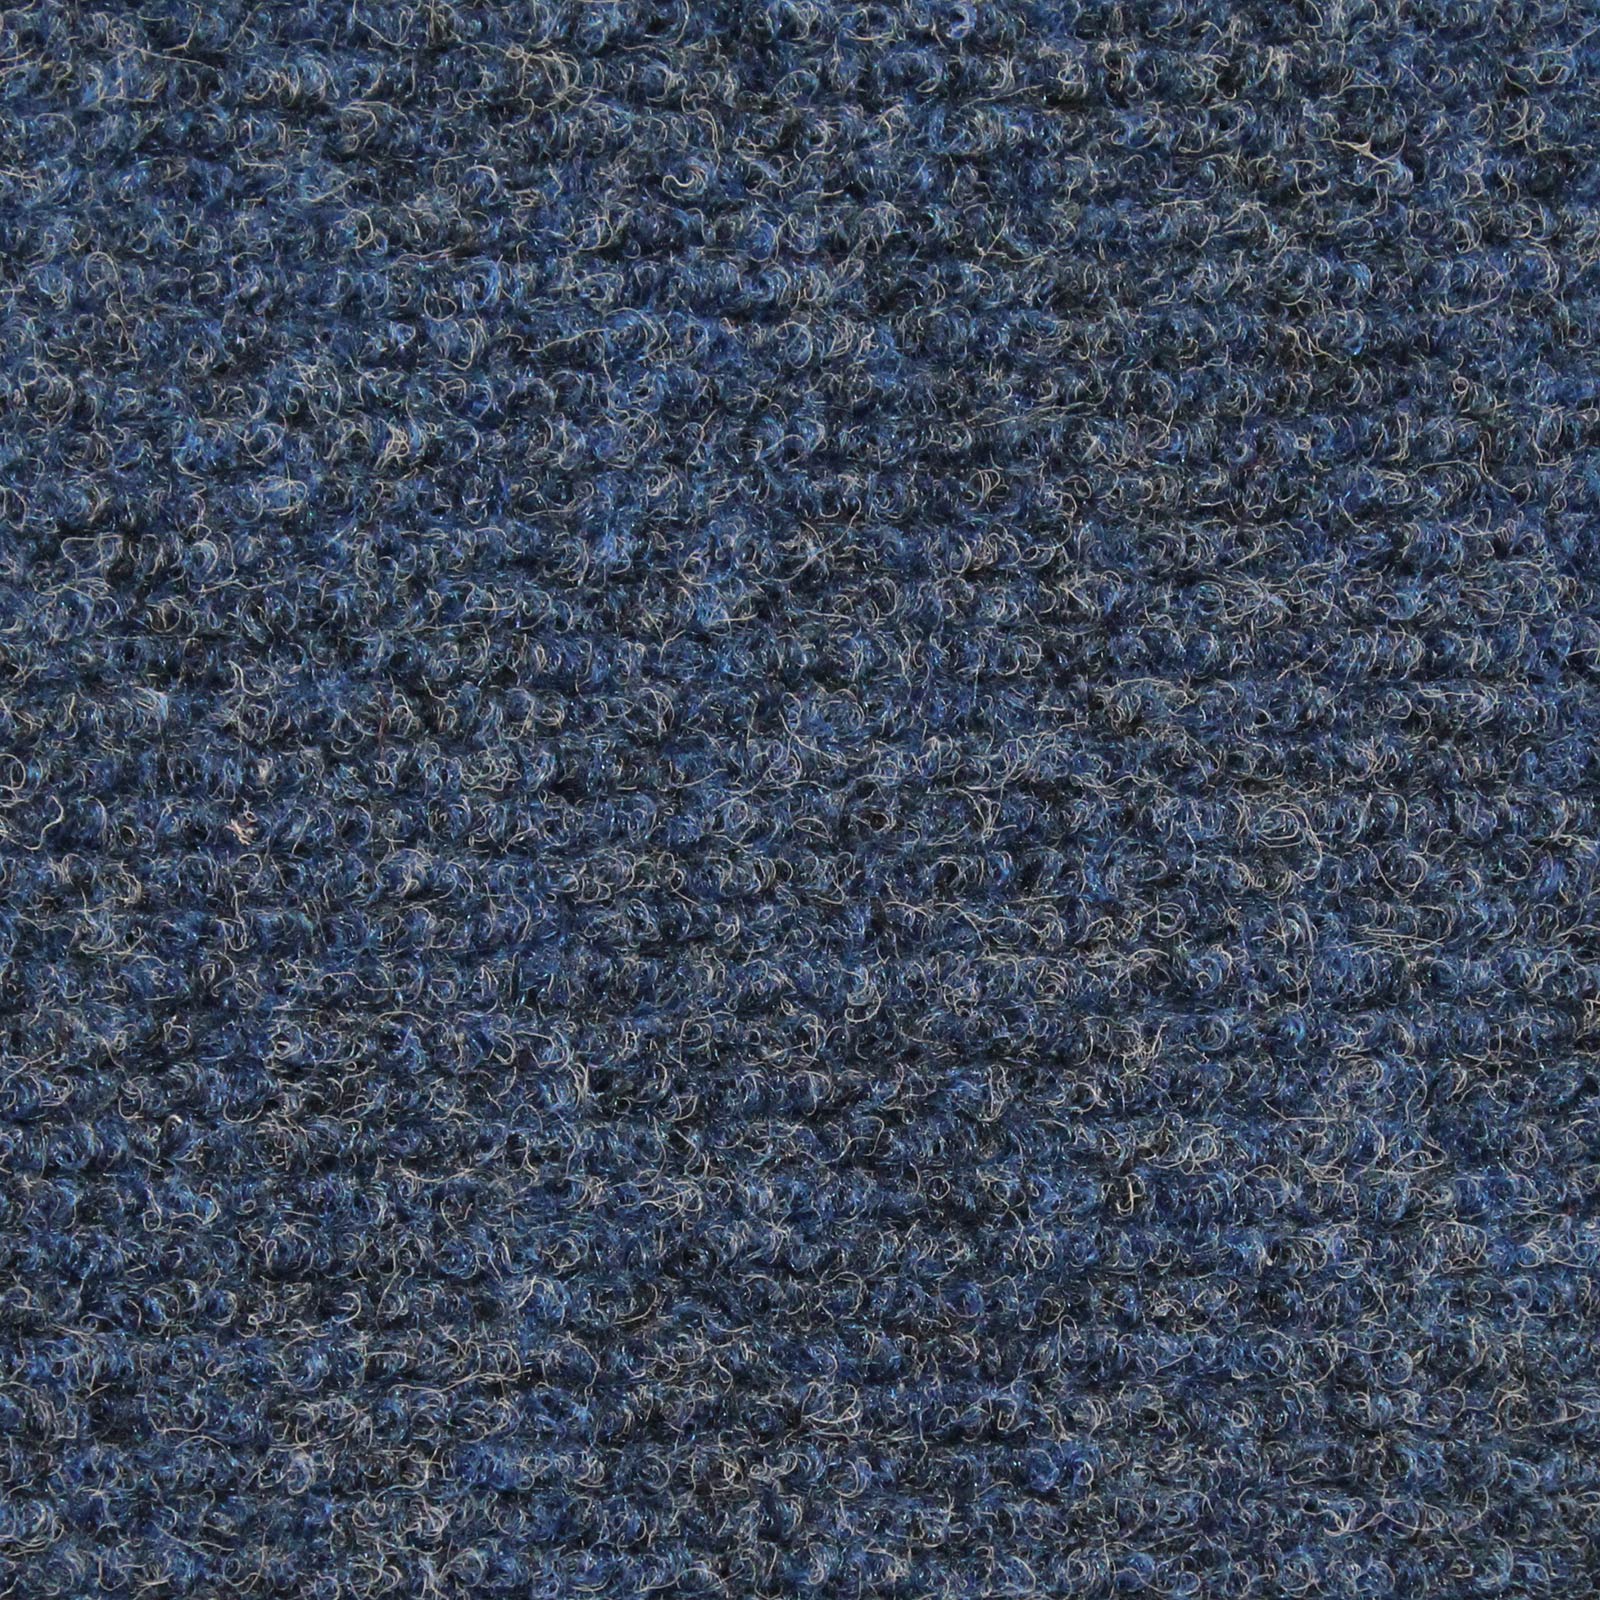 House, Home and More Indoor/Outdoor Carpet - Blue - 6' x 15'